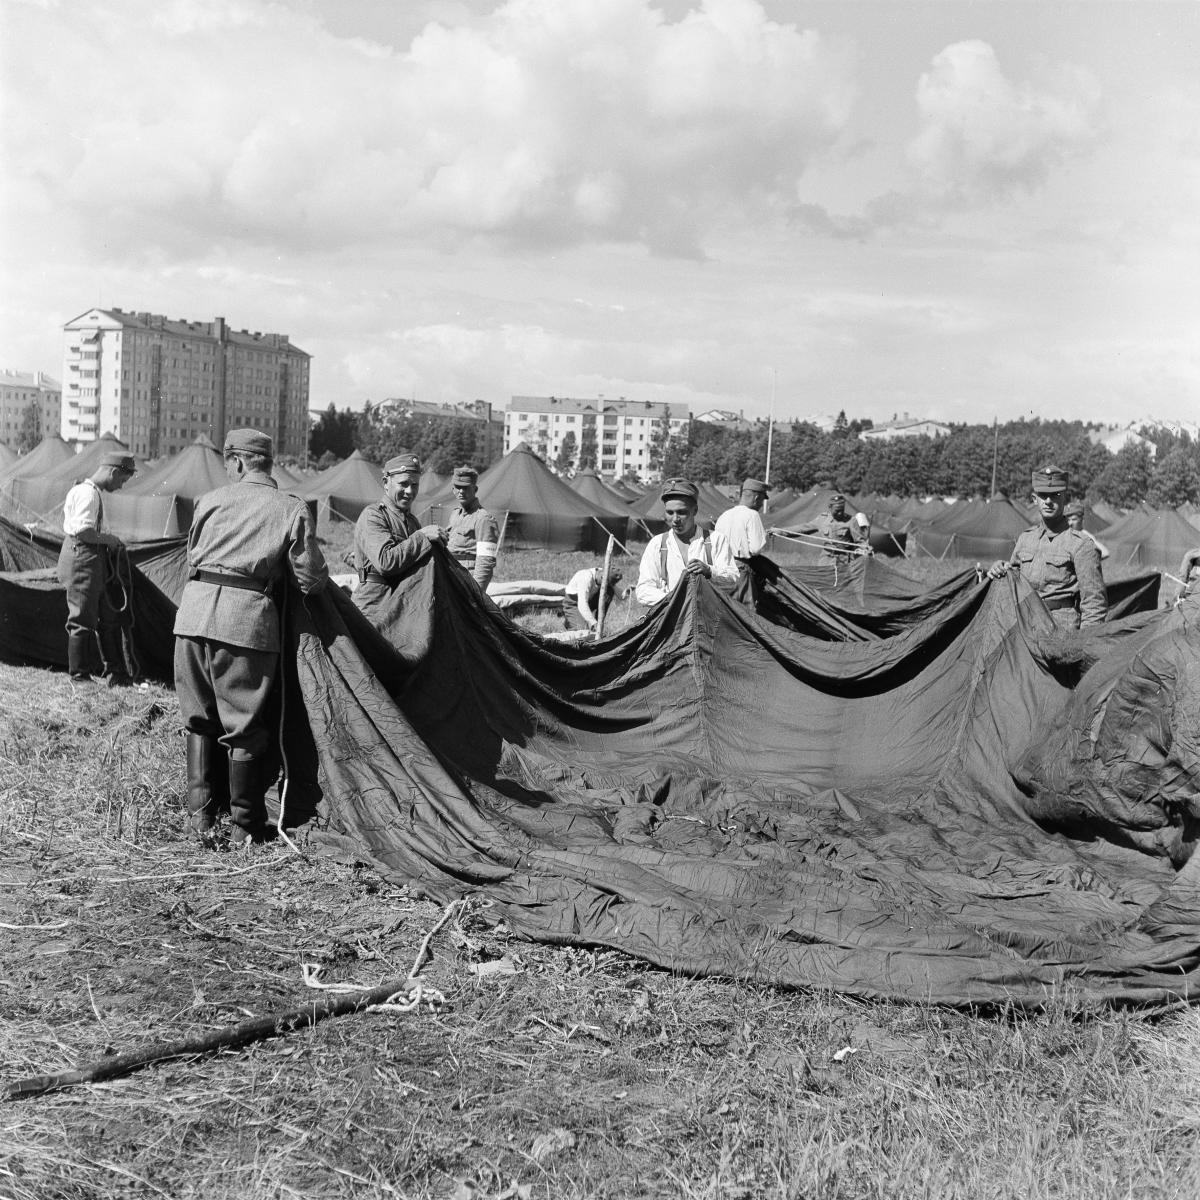 A group of soldiers is putting up a tent on a field. Block houses in the background.